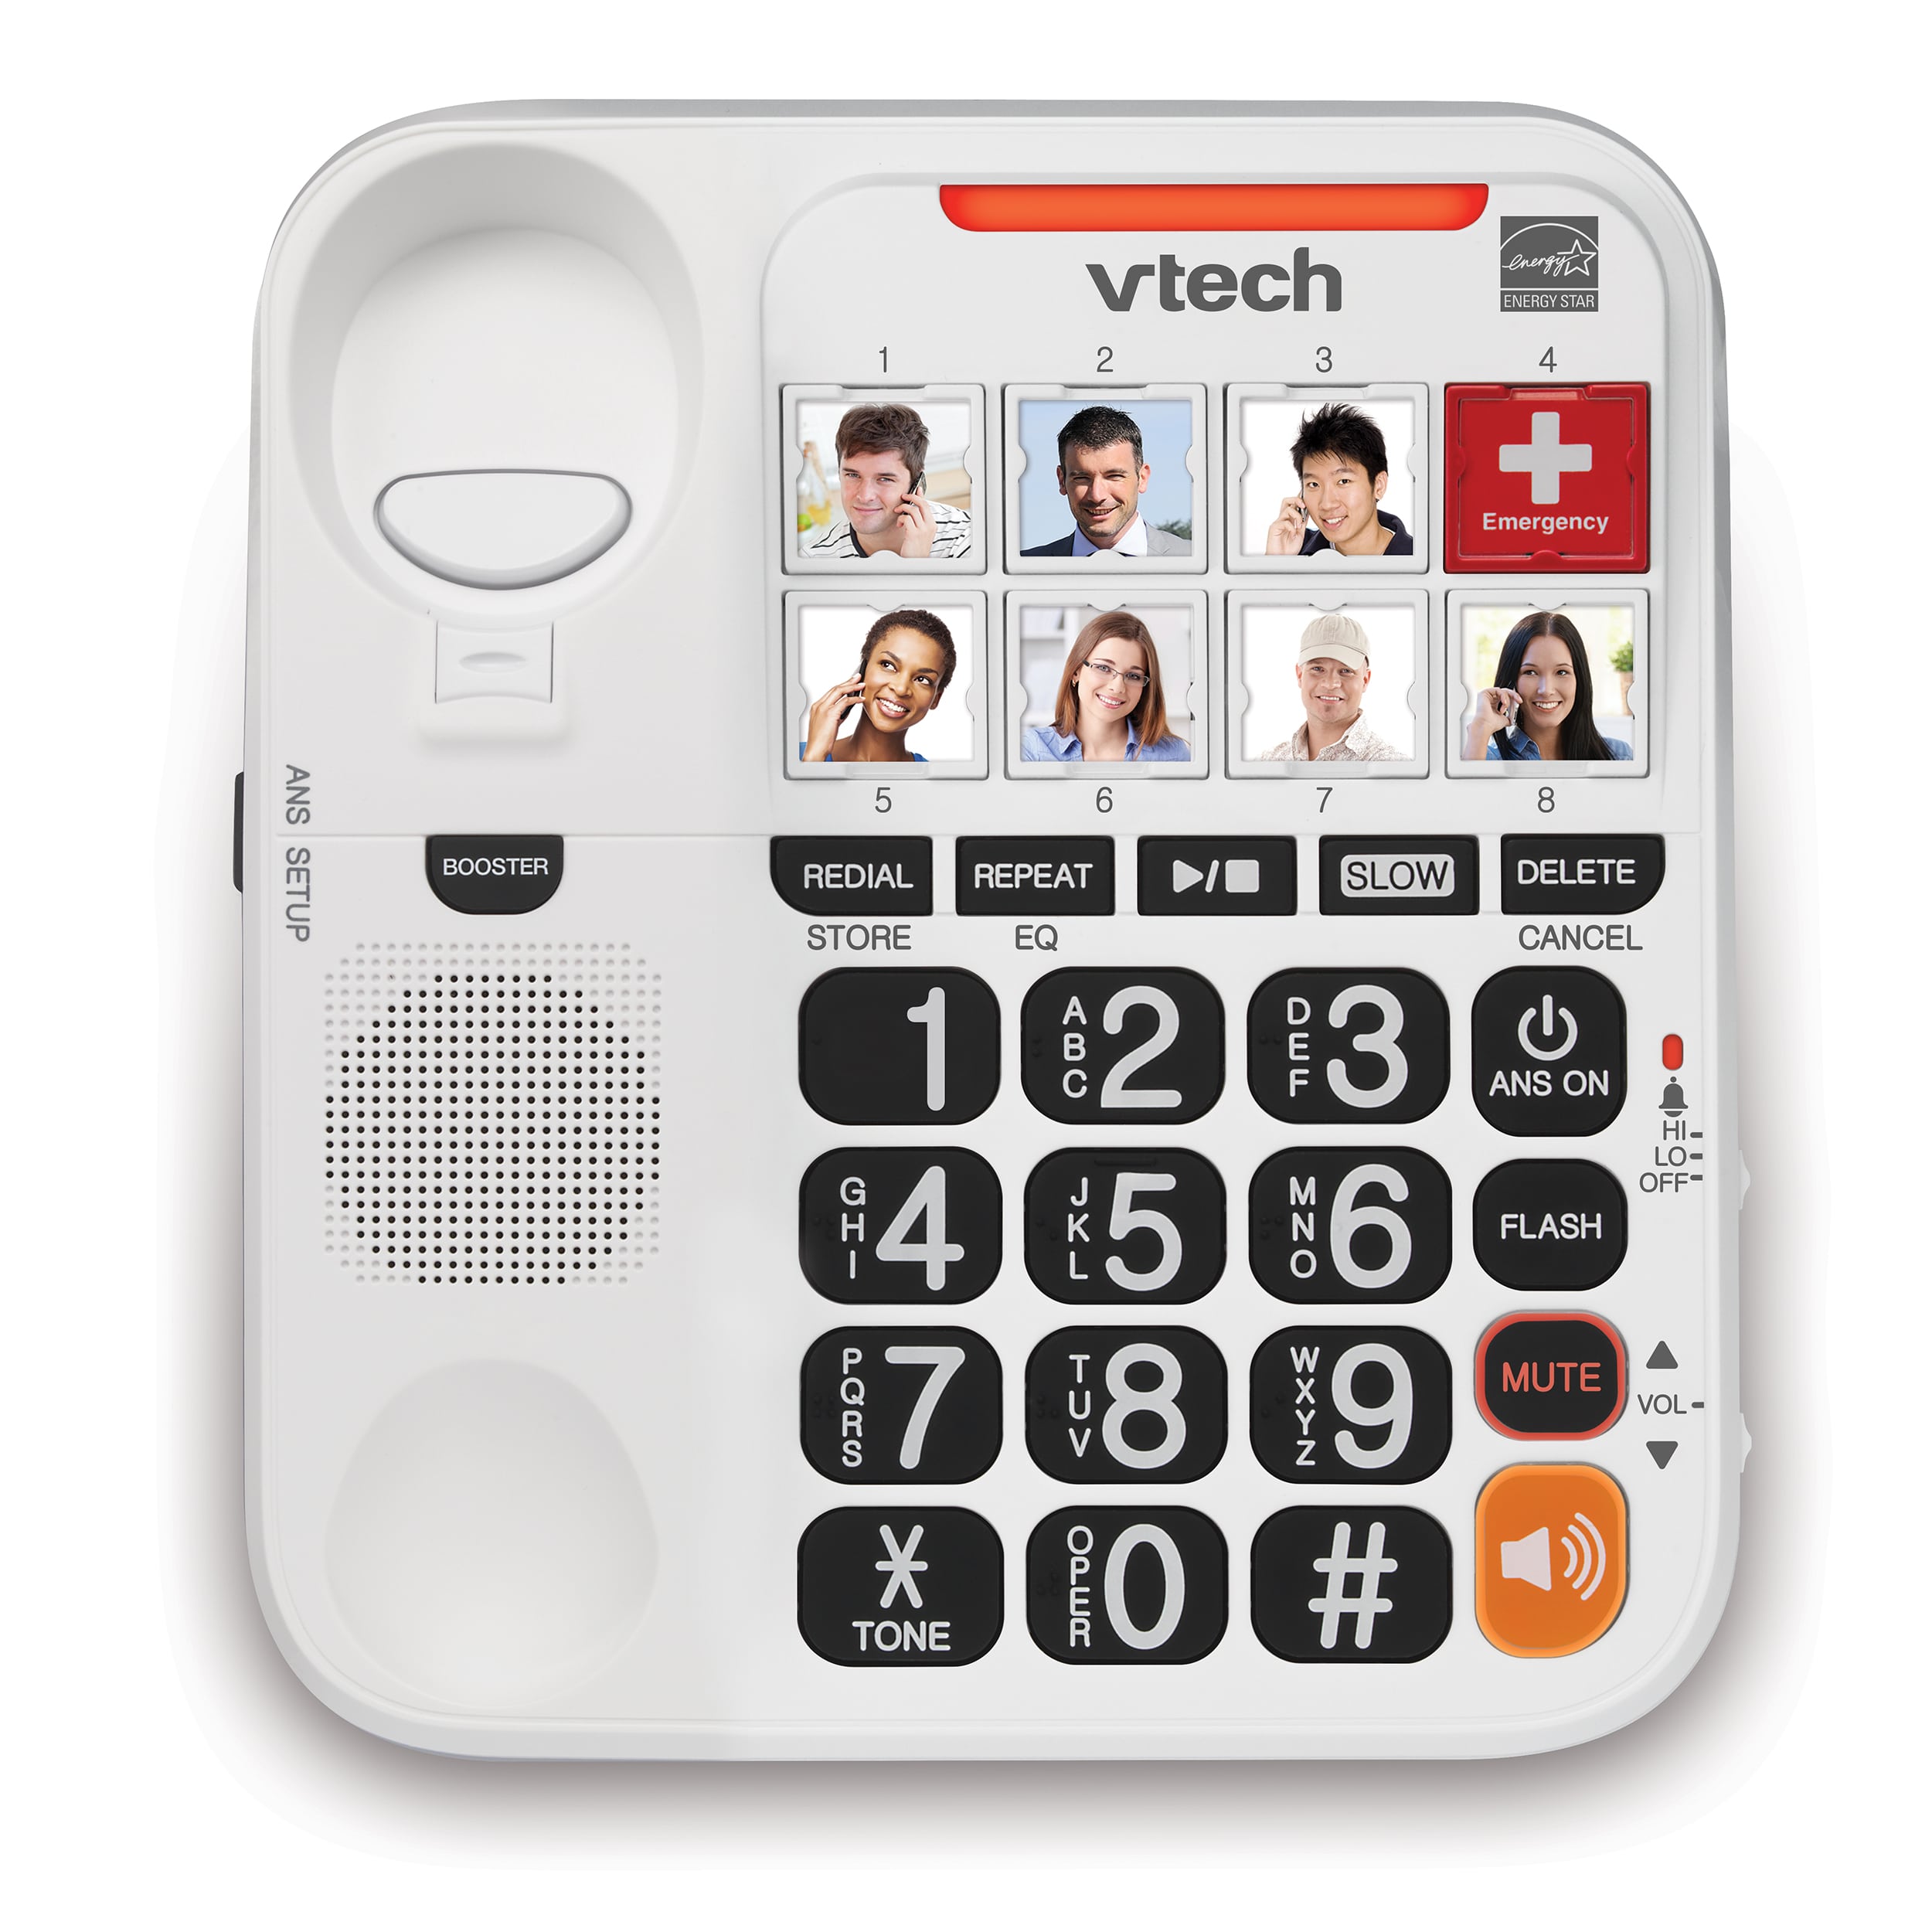 Amplified Corded Answering System with 8 Photo Speed Dial, 90dB Ringer Volume, Oversized High-Contrast buttons, and One-touch Audio Booster up to 40db - view 13